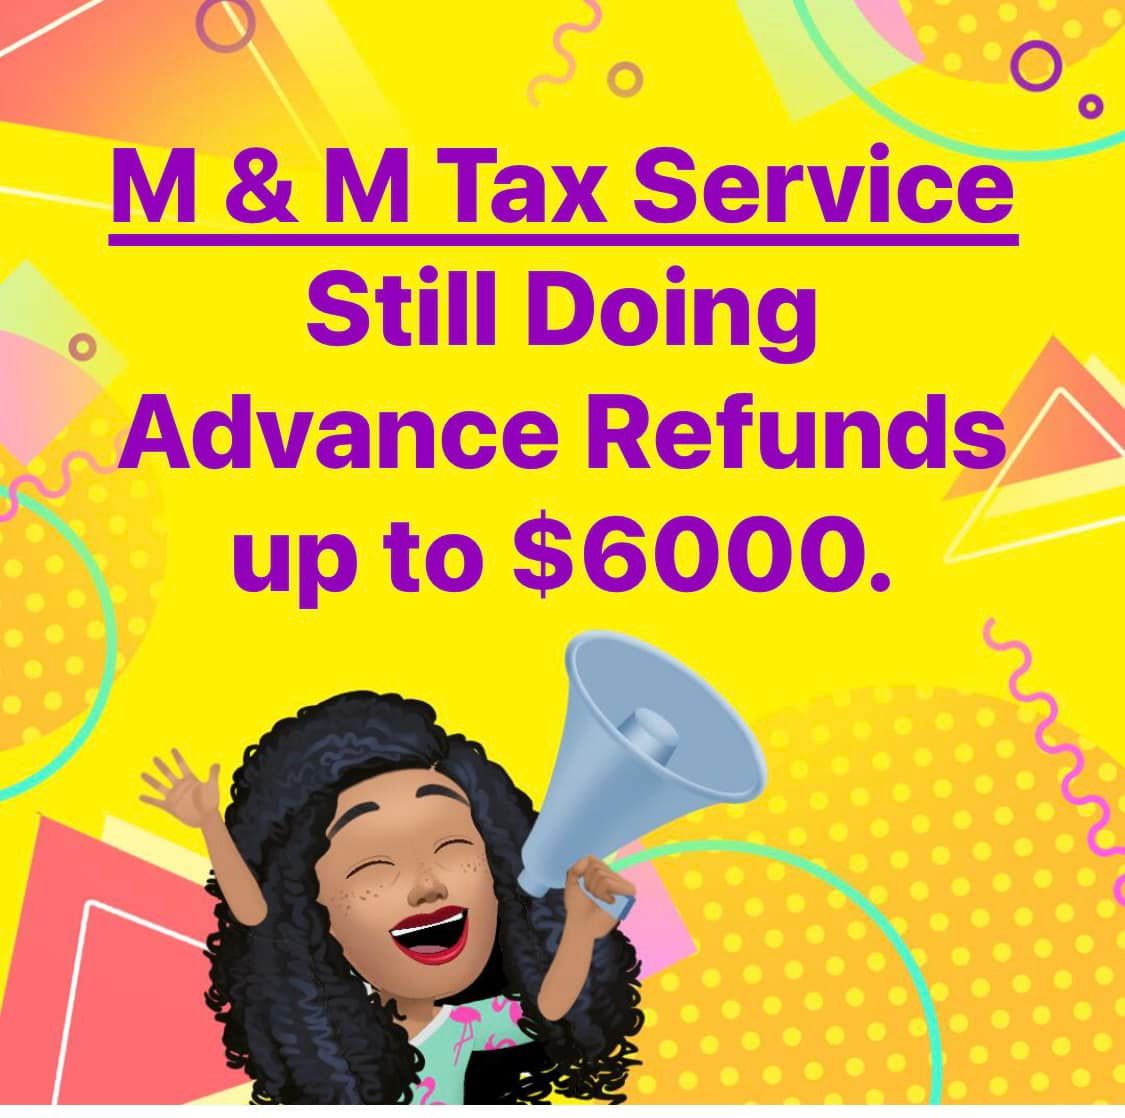 M & M Tax & Permit Services 3341 US 49, Florence Mississippi 39073